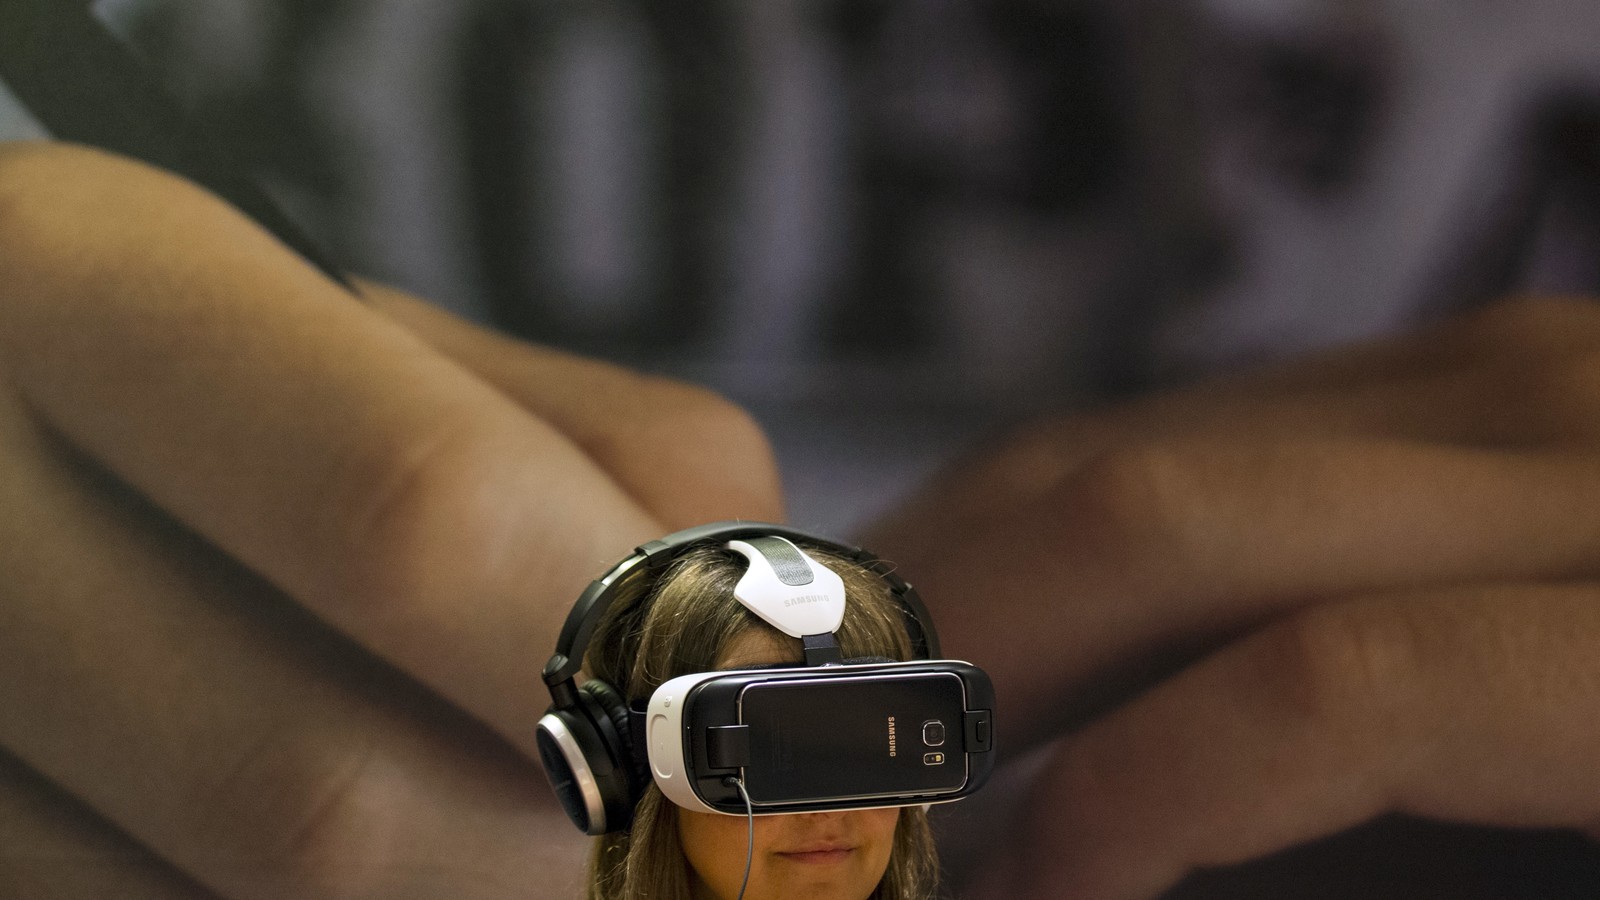 The NBA's impressive virtual reality streaming experience allows you to be  any player